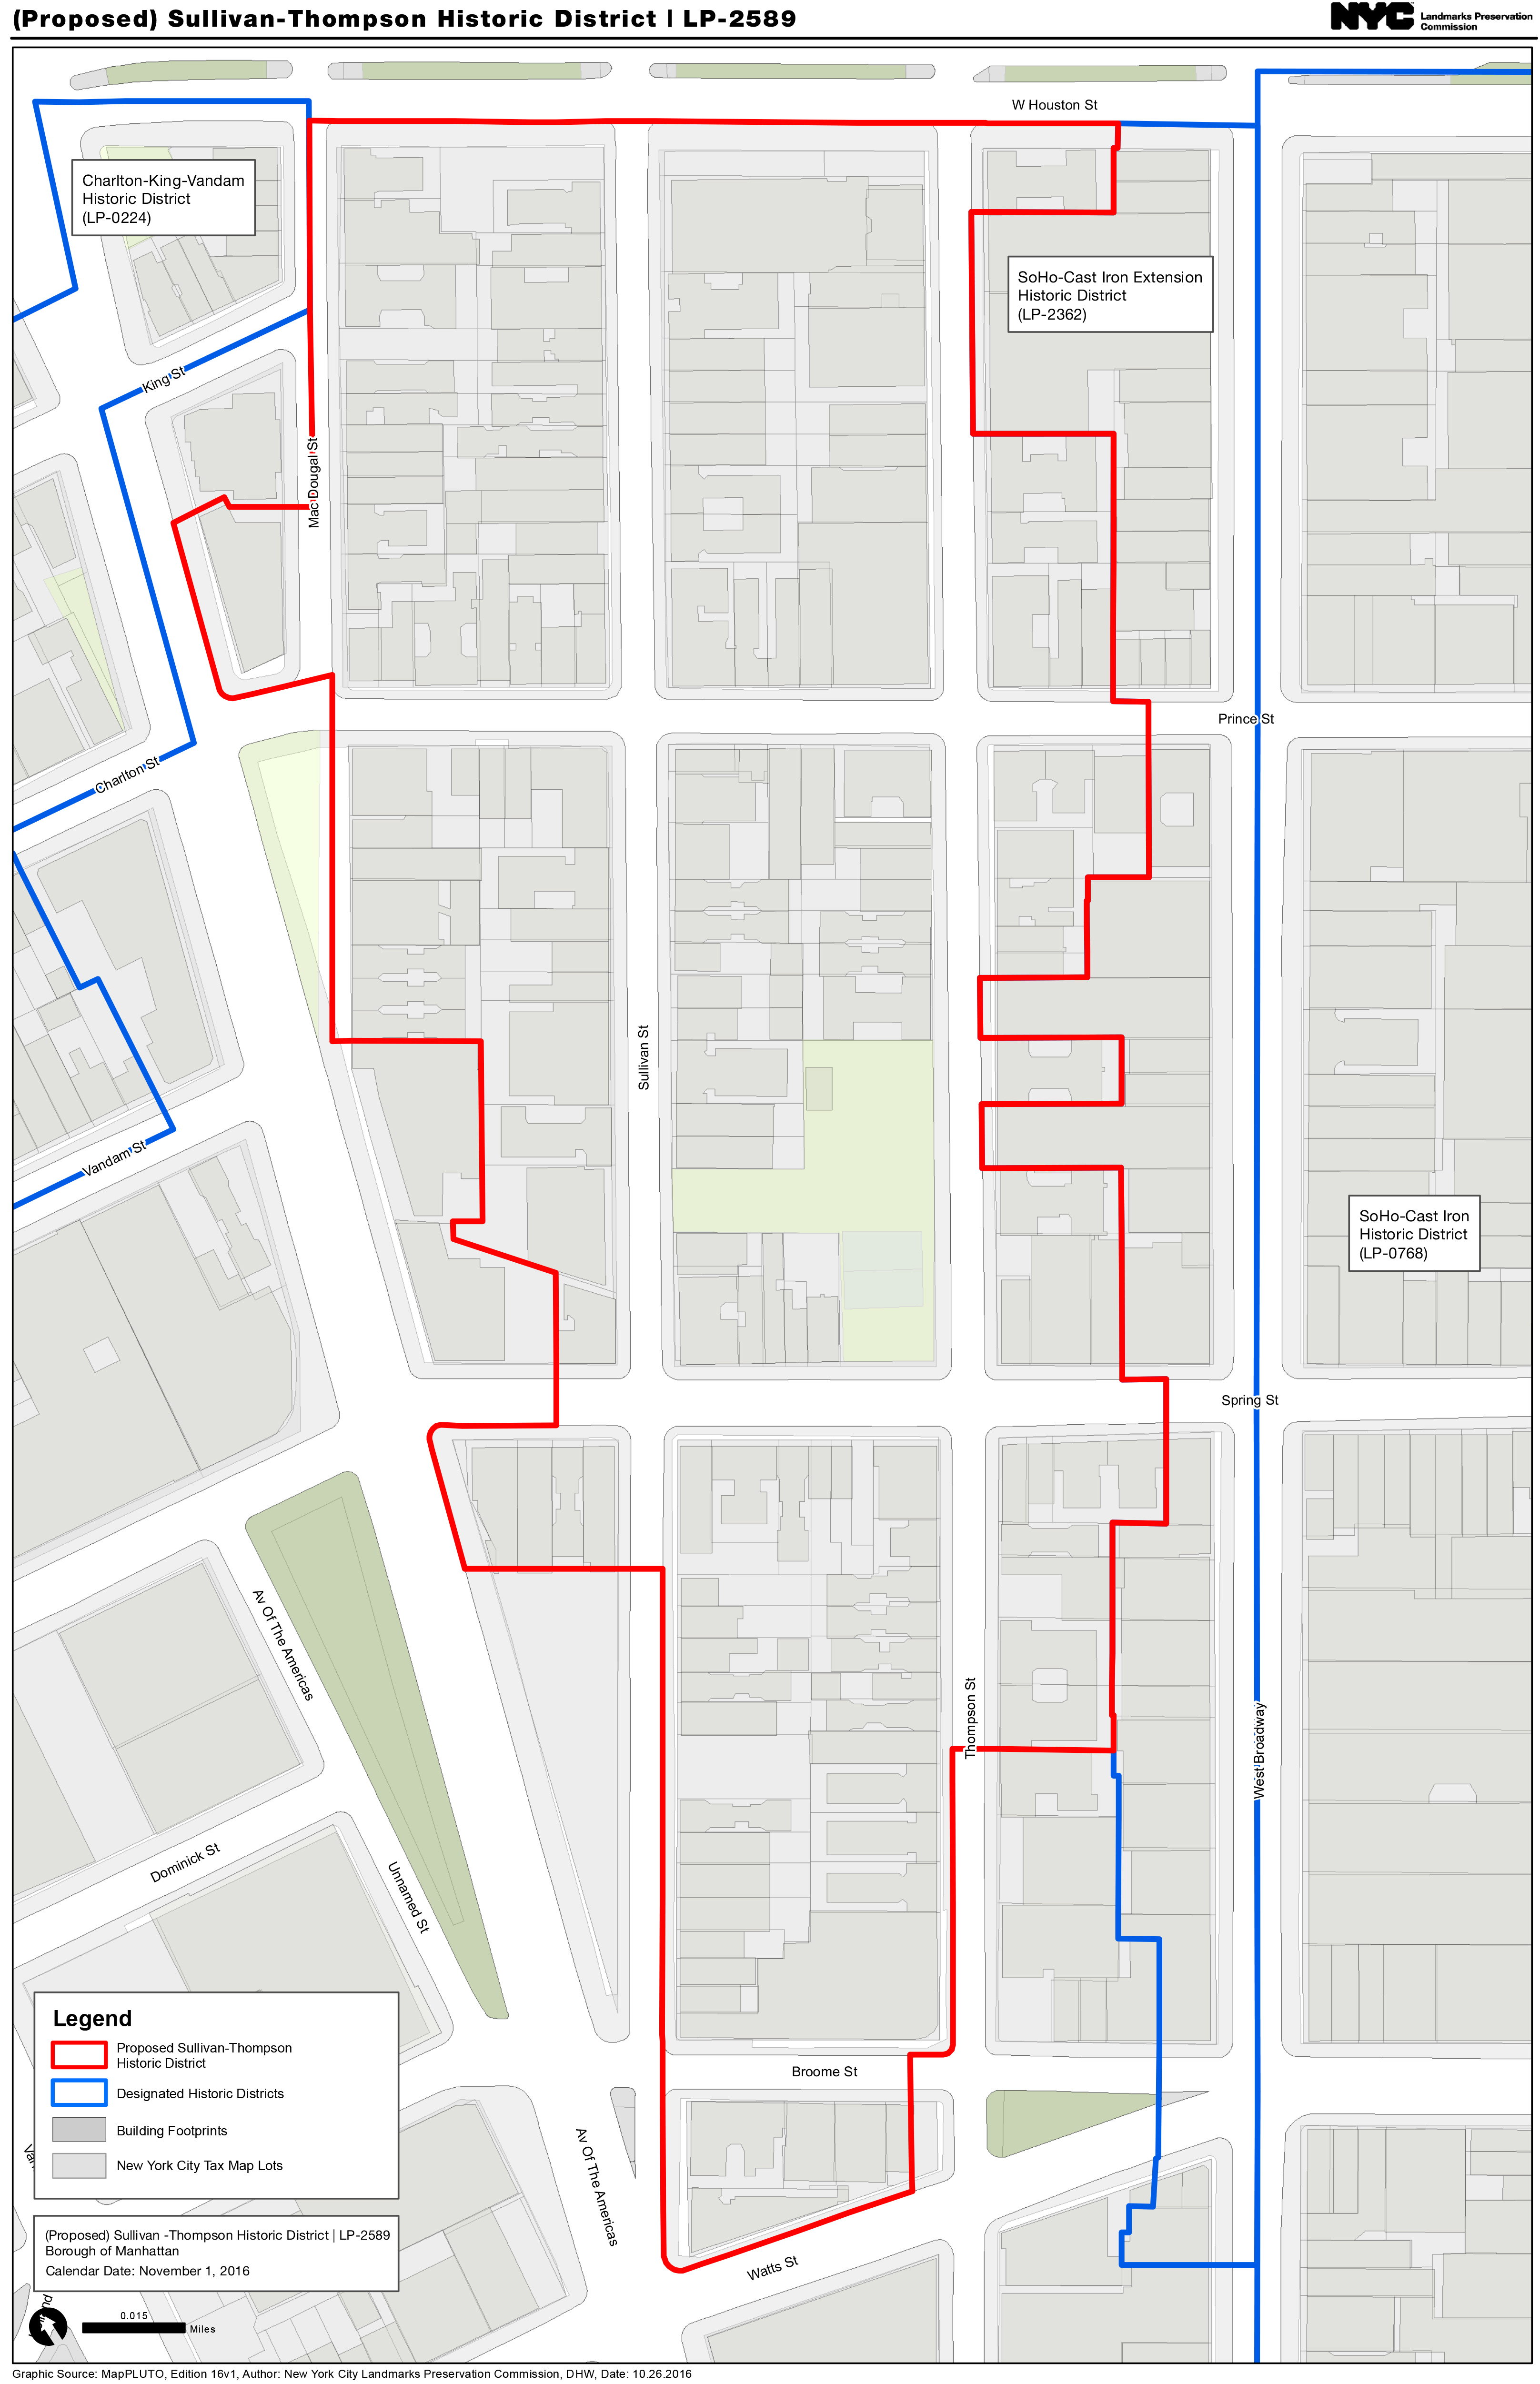 Map of the Proposed Sullivan-Thompson Historic District